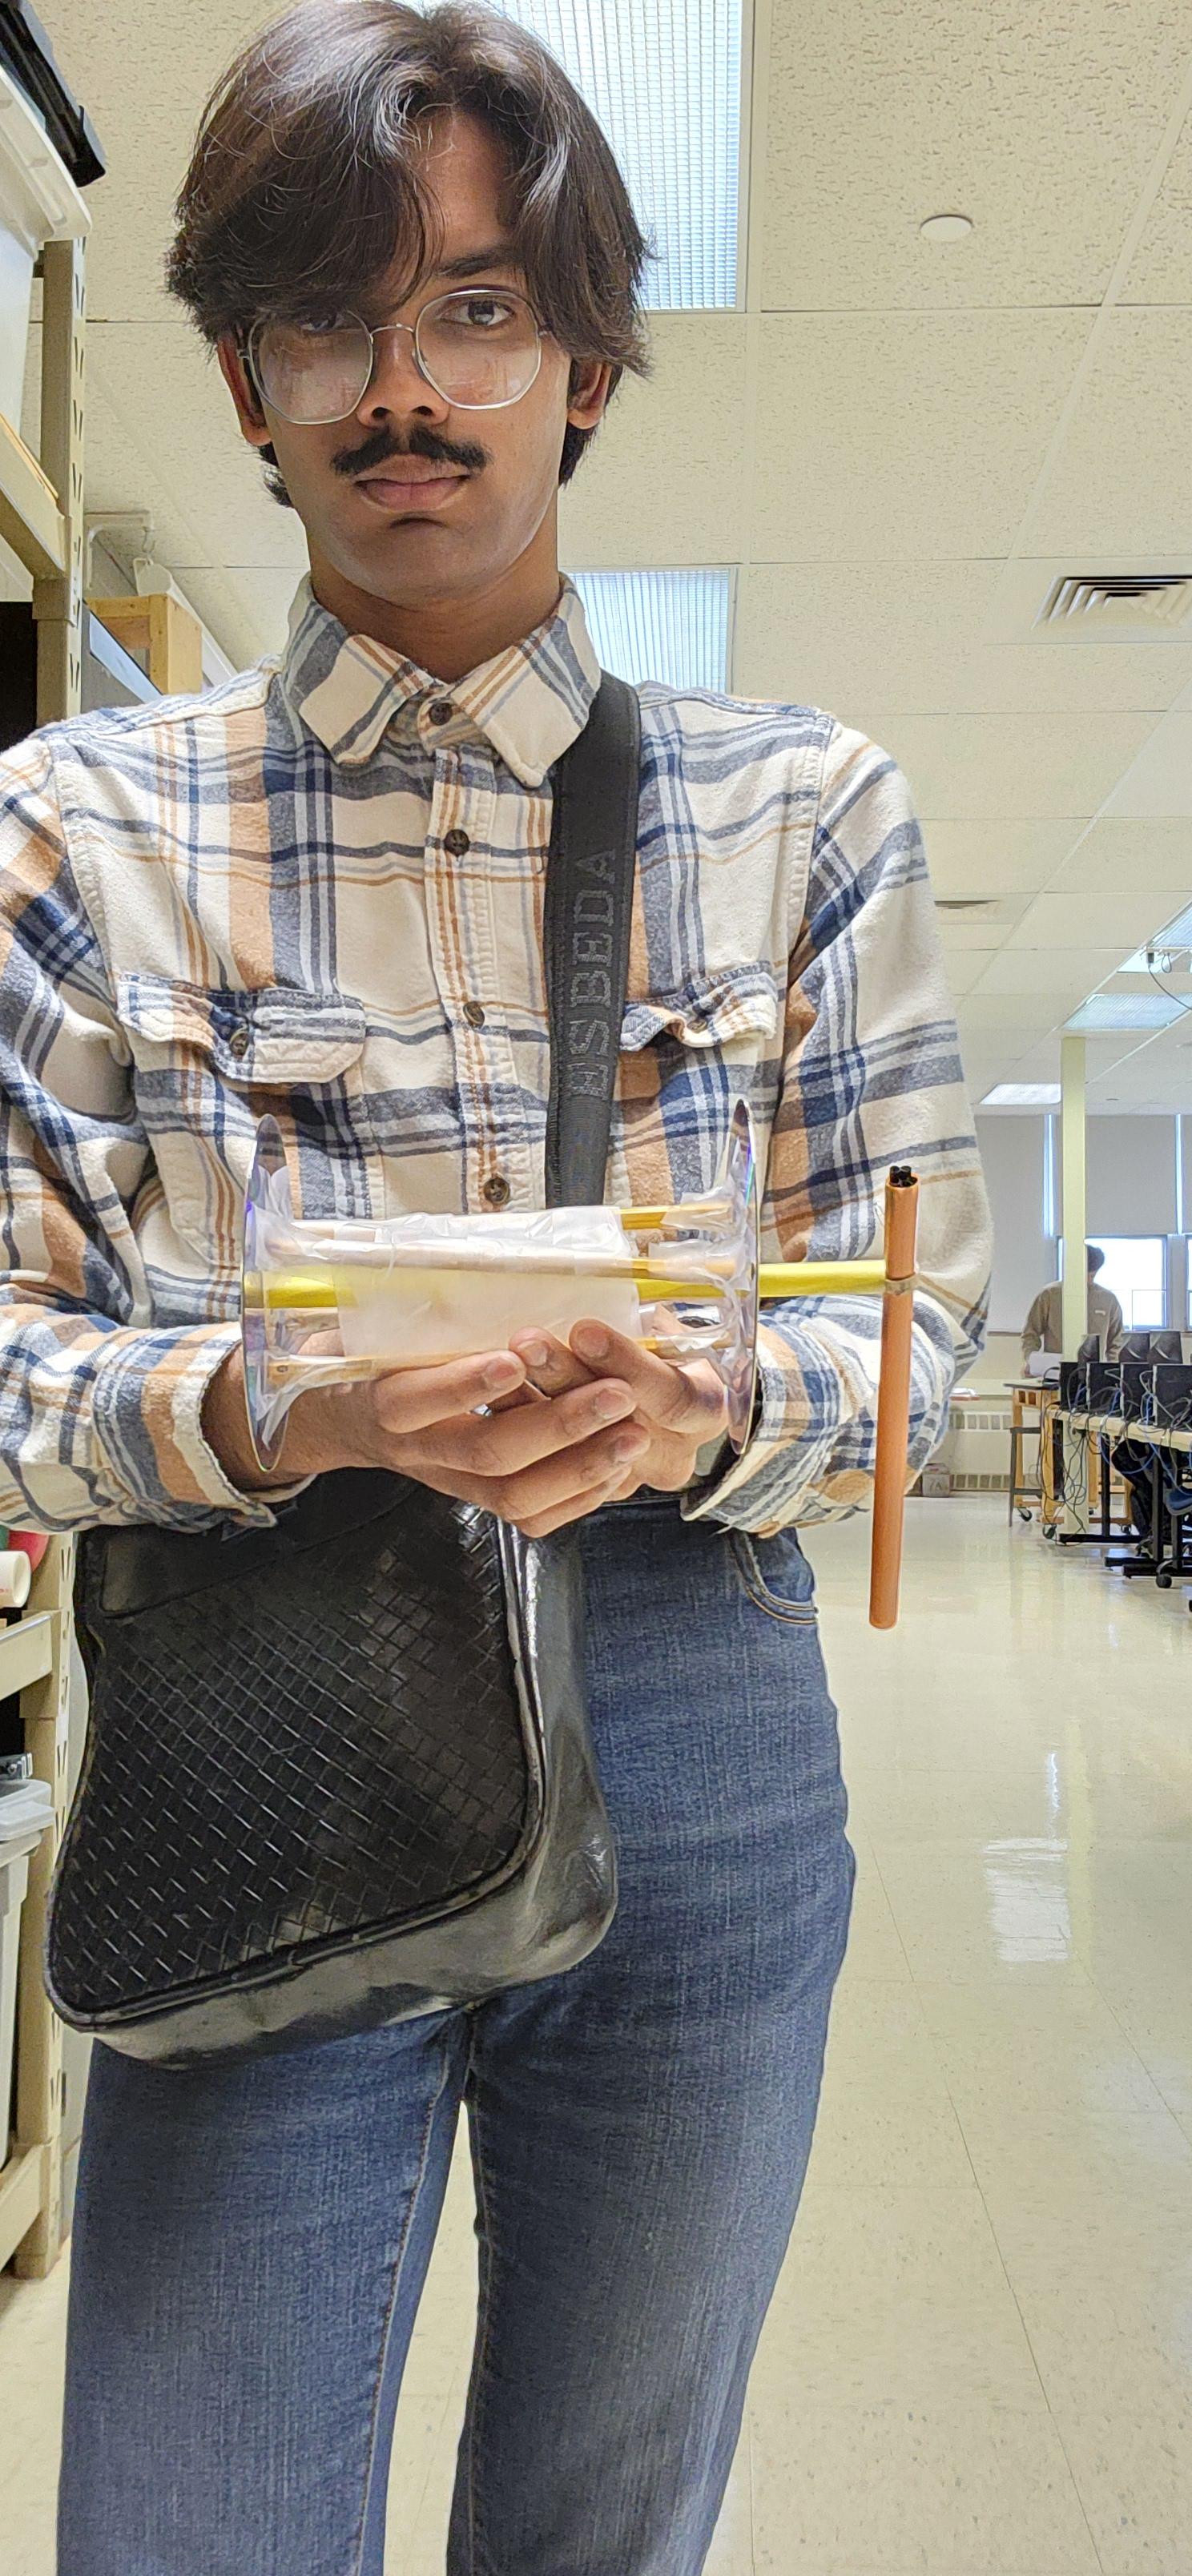 Willowbrook Project Lead The Way, Principles of Engineering students compete in Science Buddies Rubber Band Car Challenge